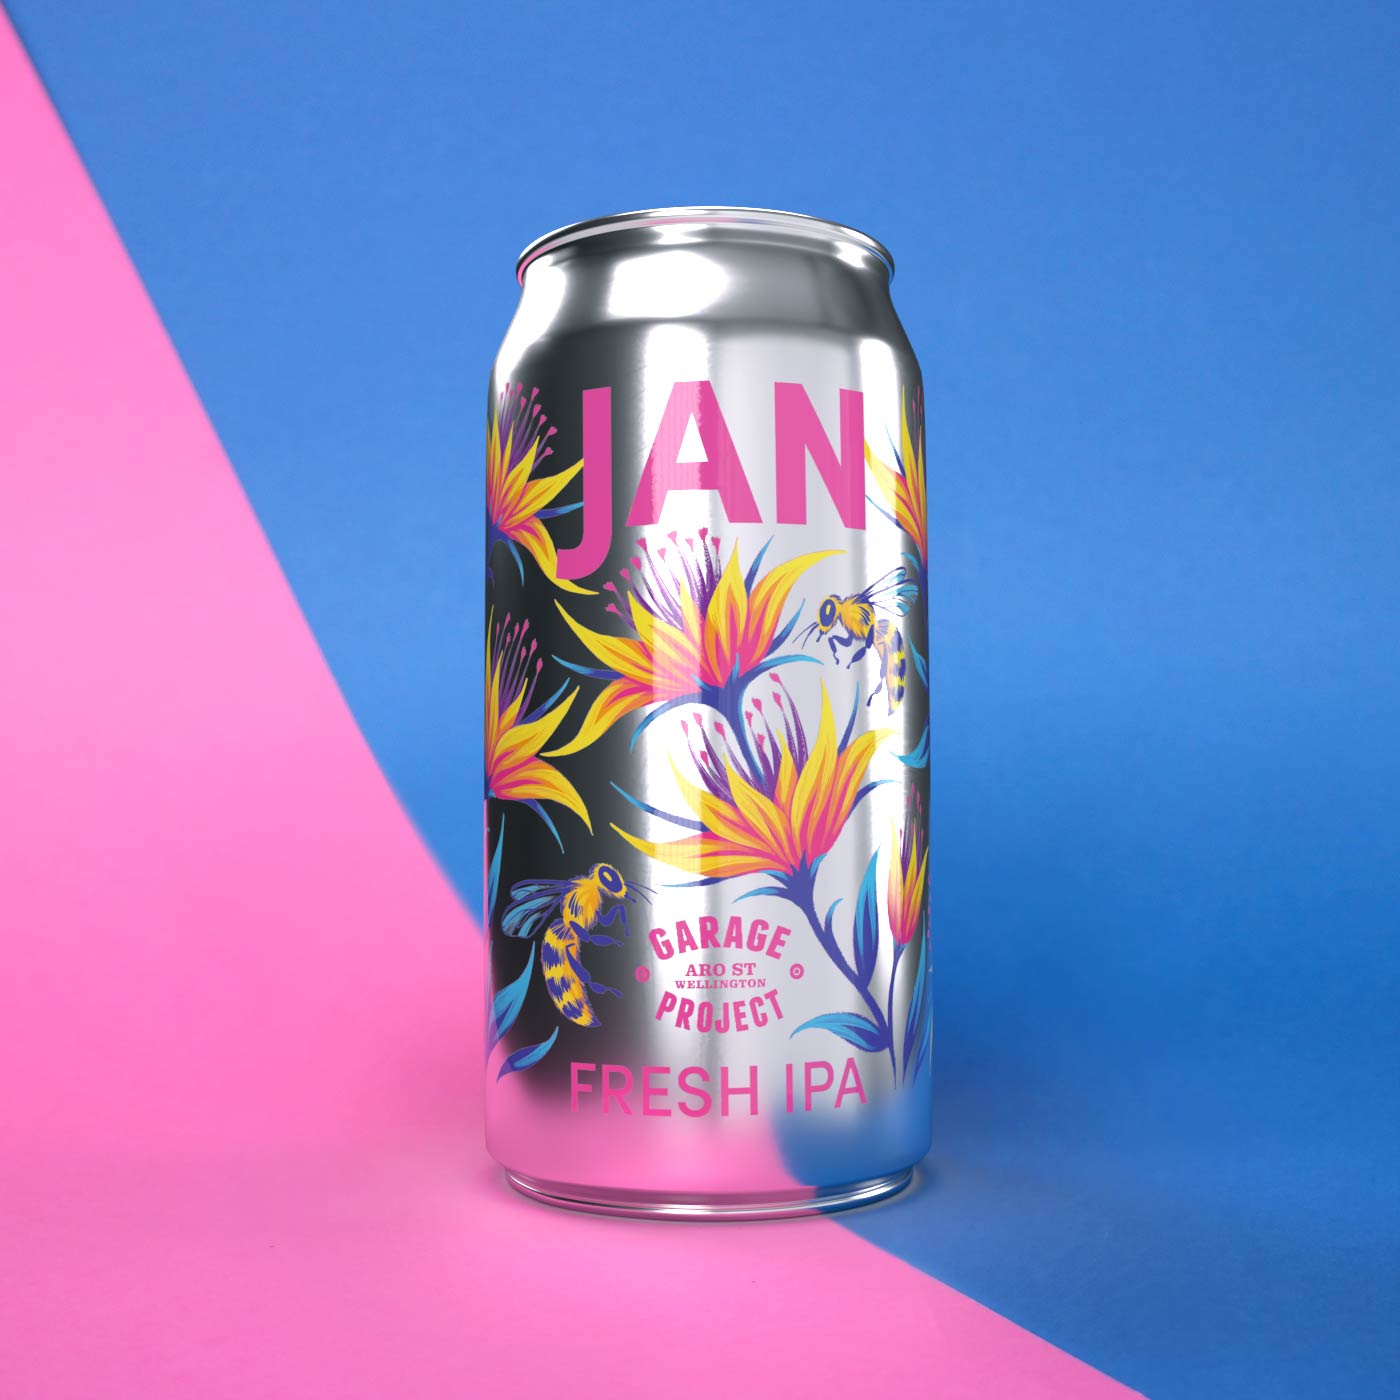 Fresh Jan Garage Project beer can packaging artwork by Andrea Muller